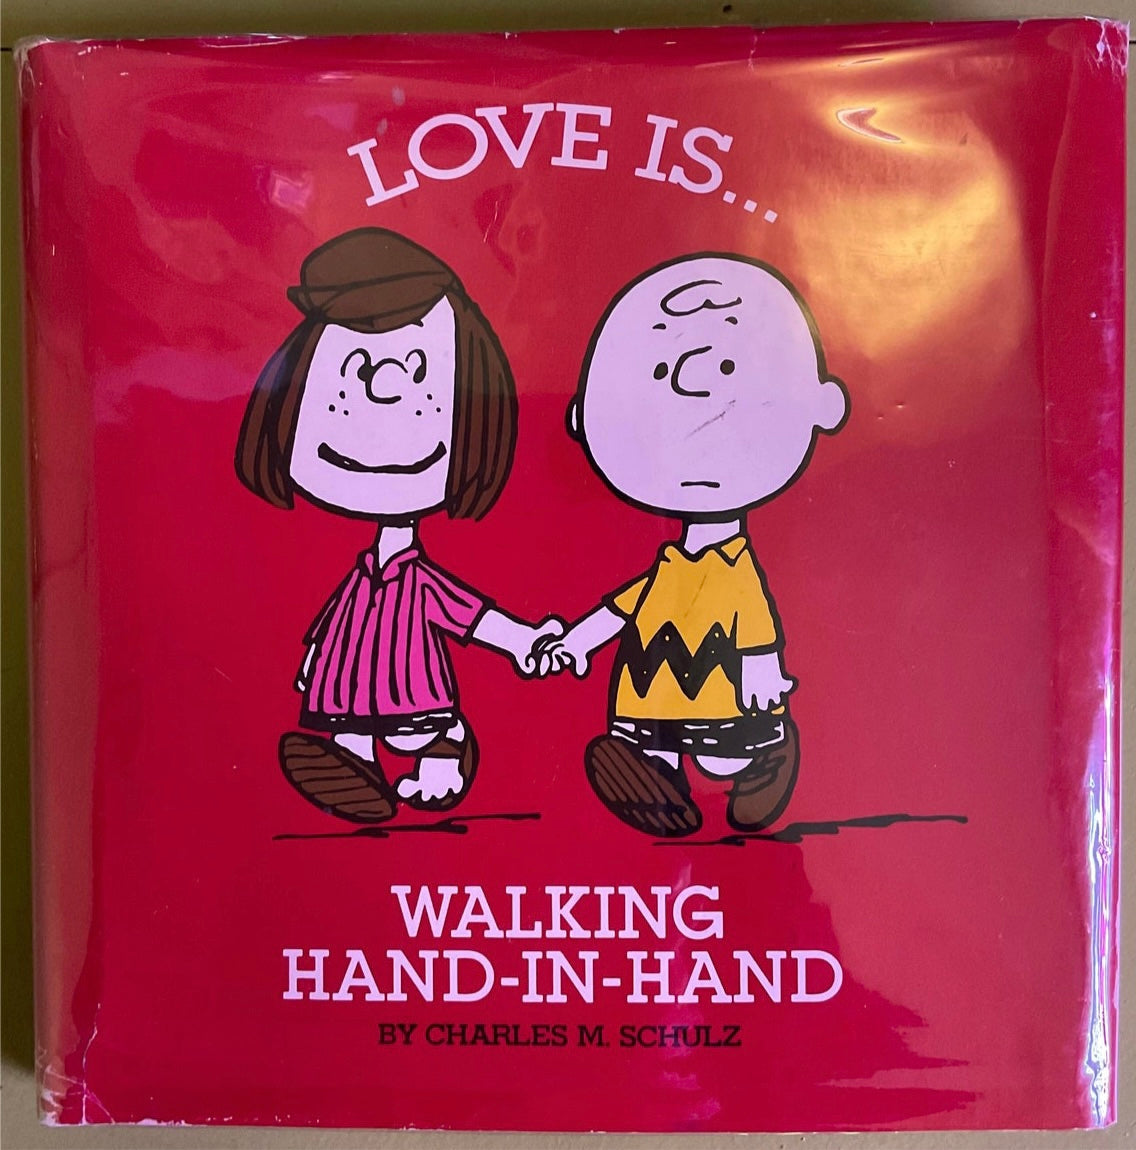 Love is… Walking Hand in Hand, Charles M. Schulz